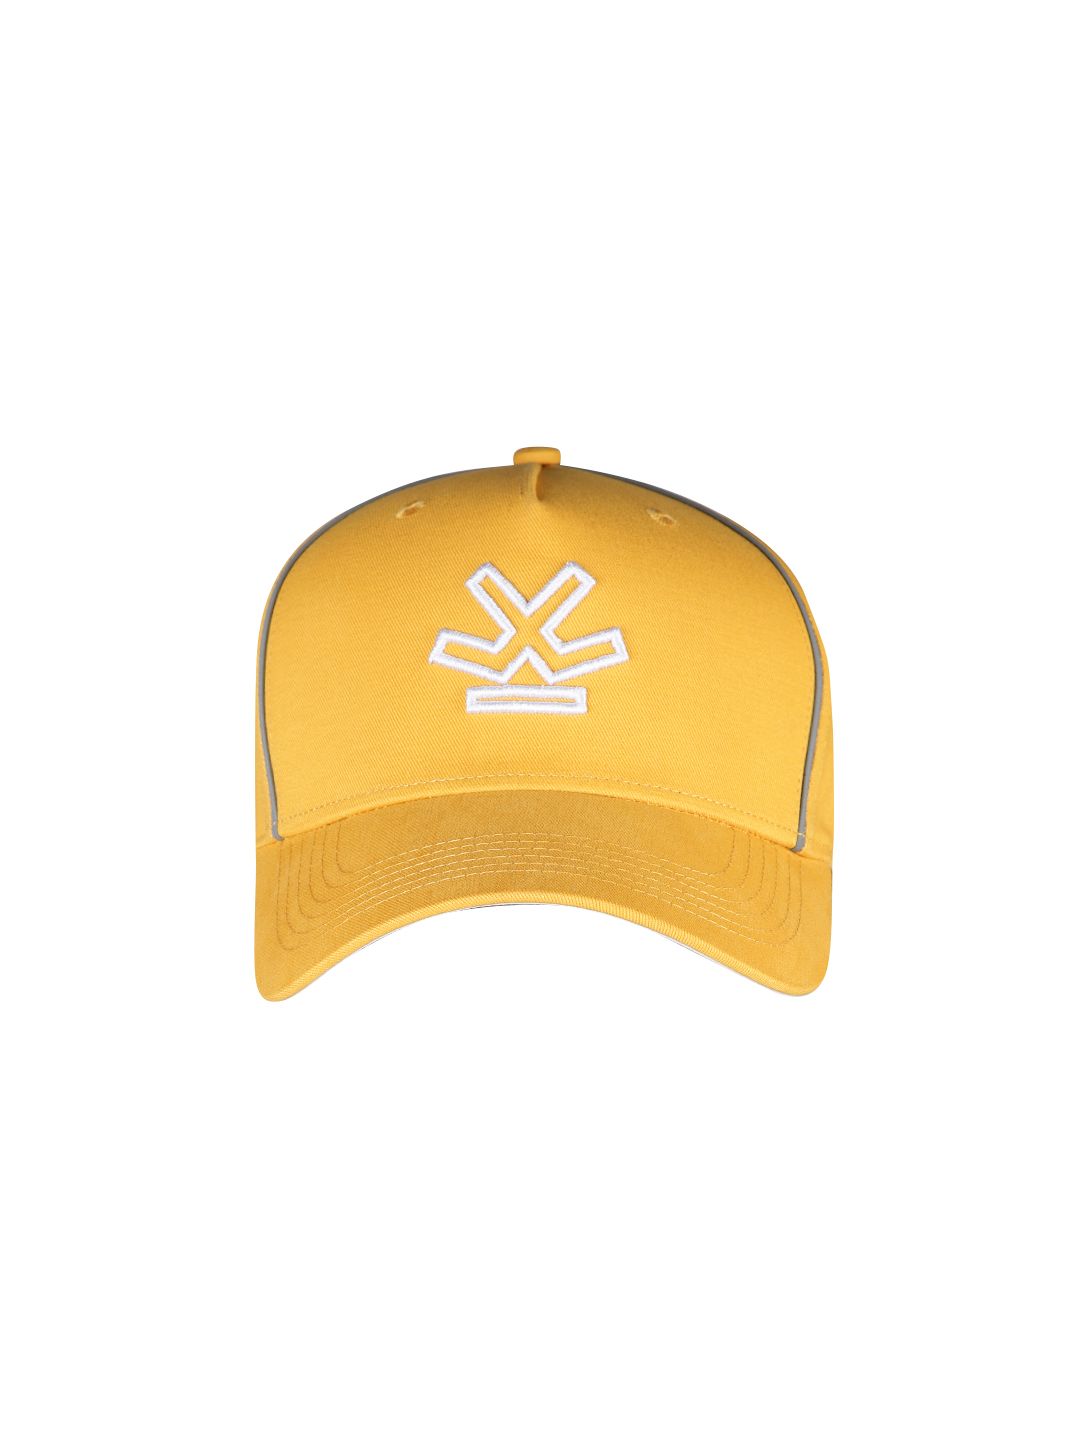 WROGN Unisex Yellow Embroidered Baseball Cap Price in India